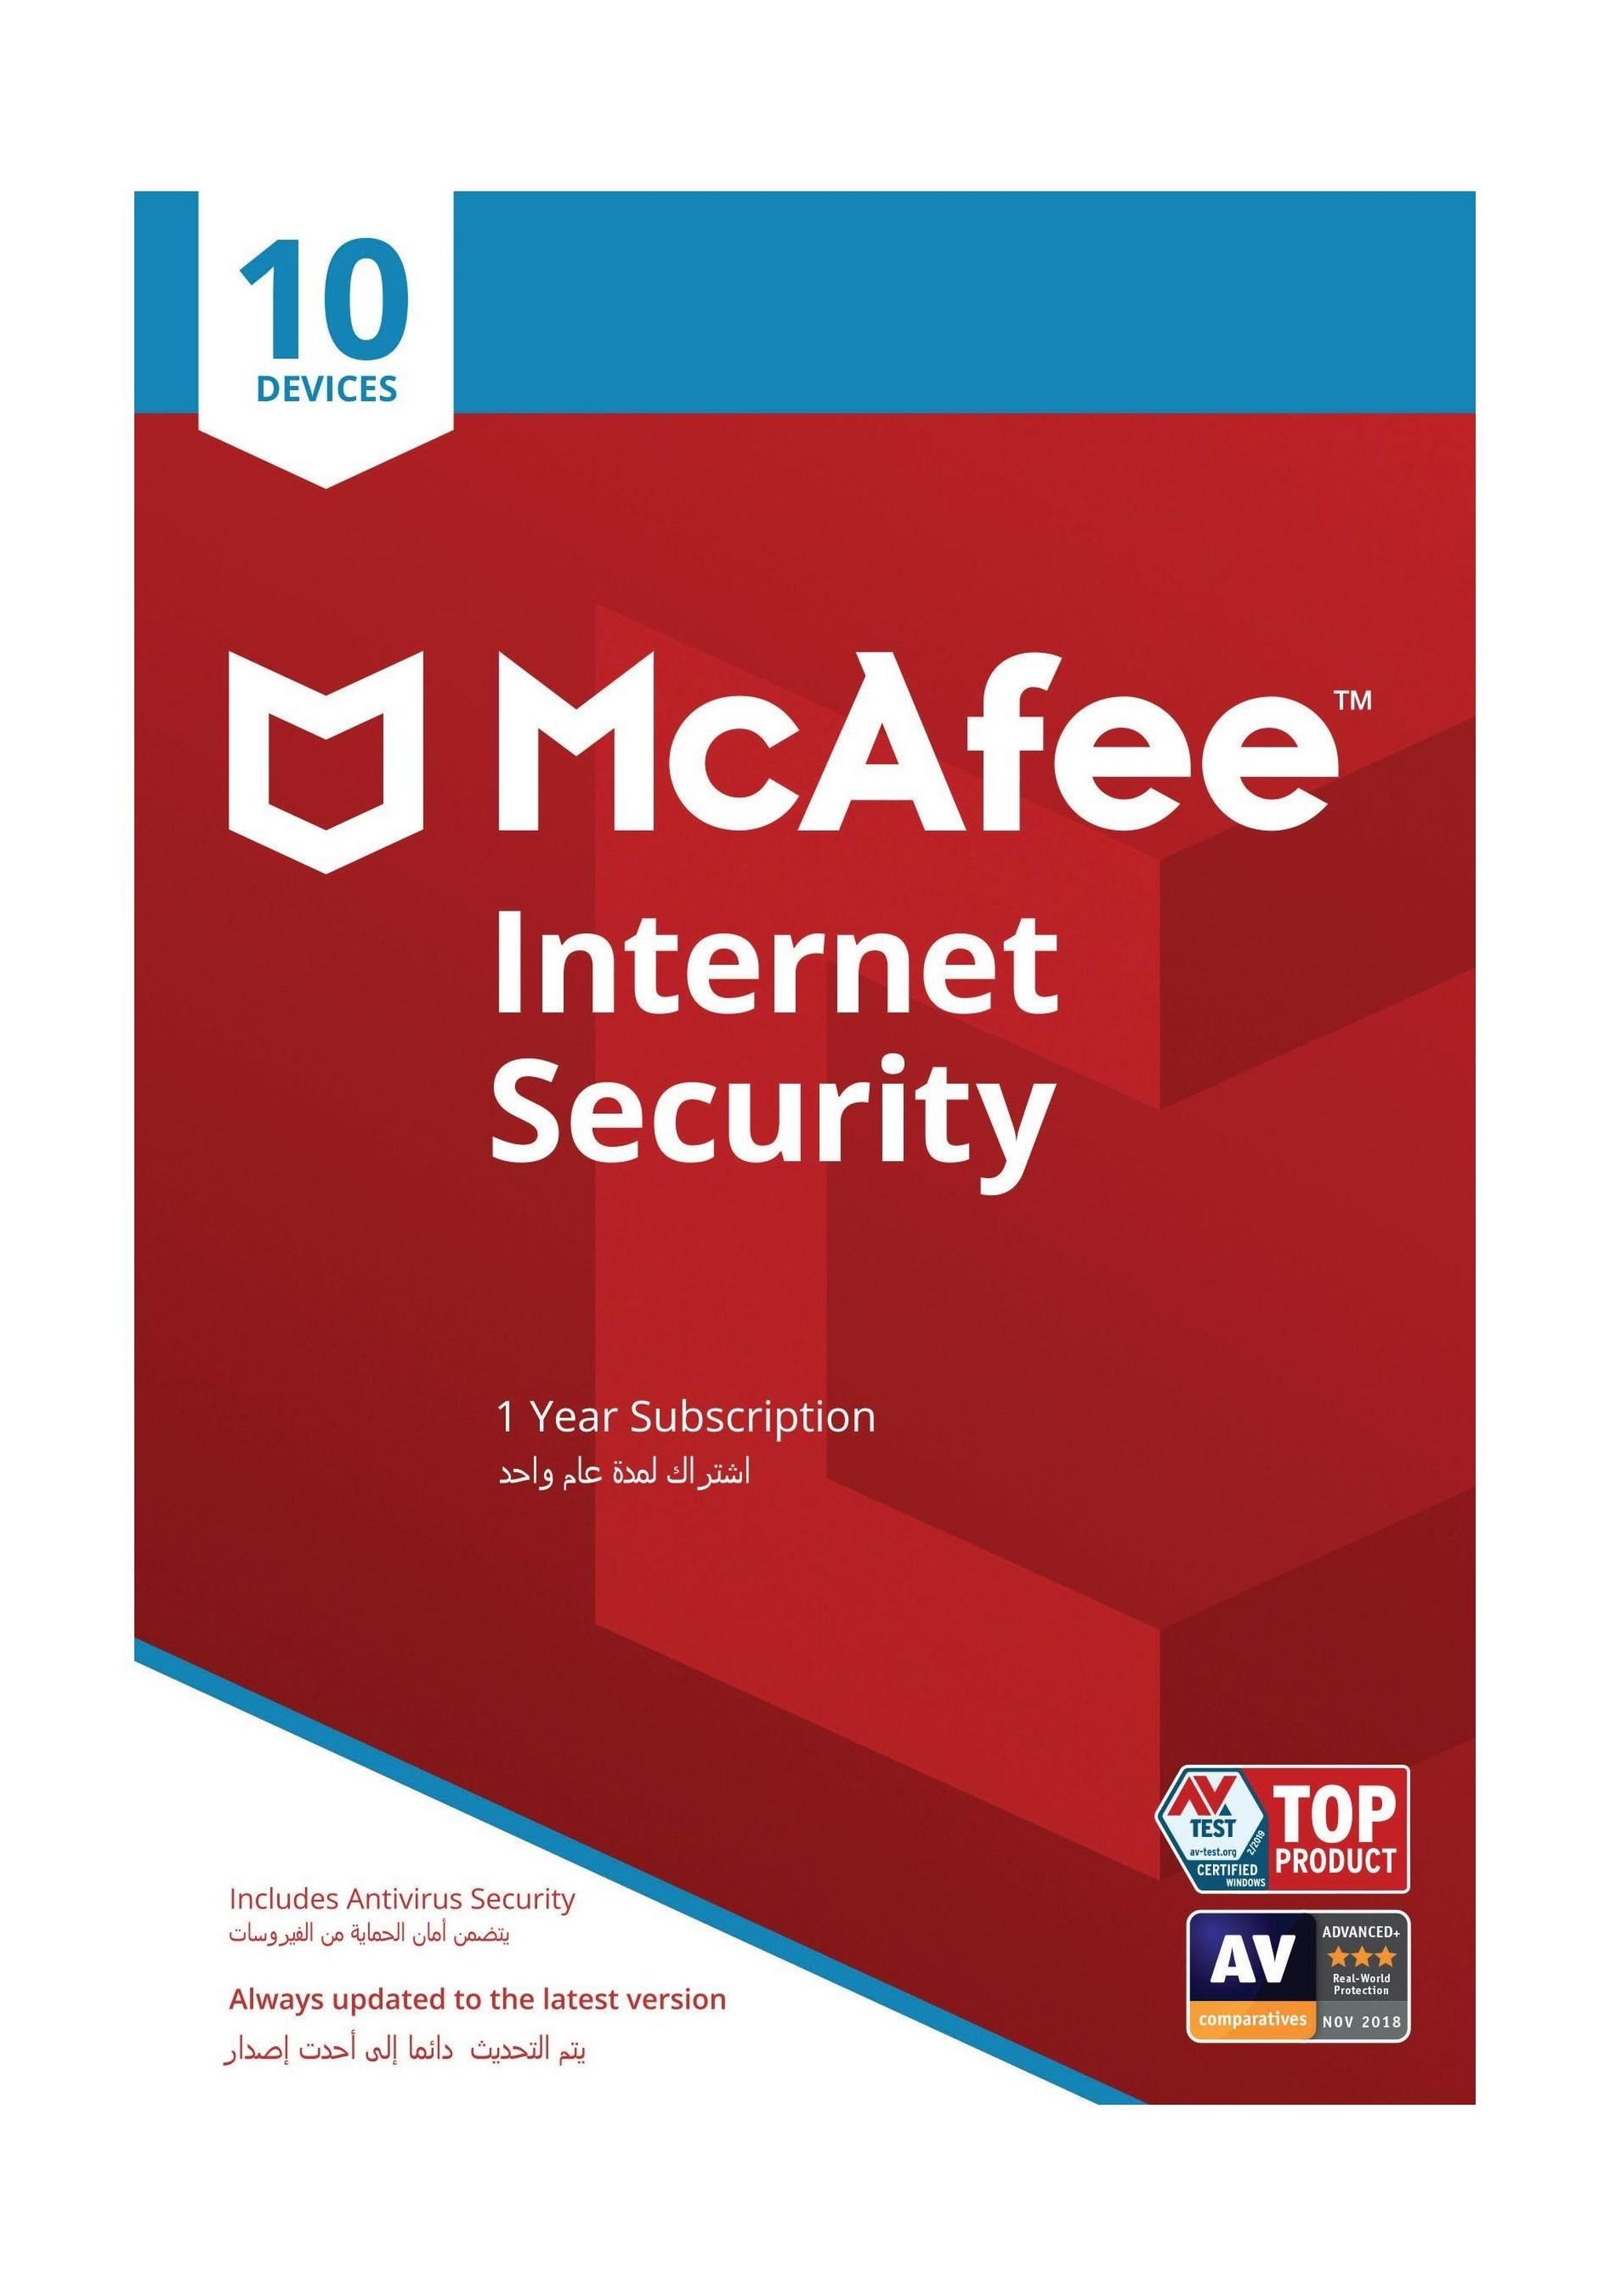 McAfee Internet Security 2019 - 10 Devices